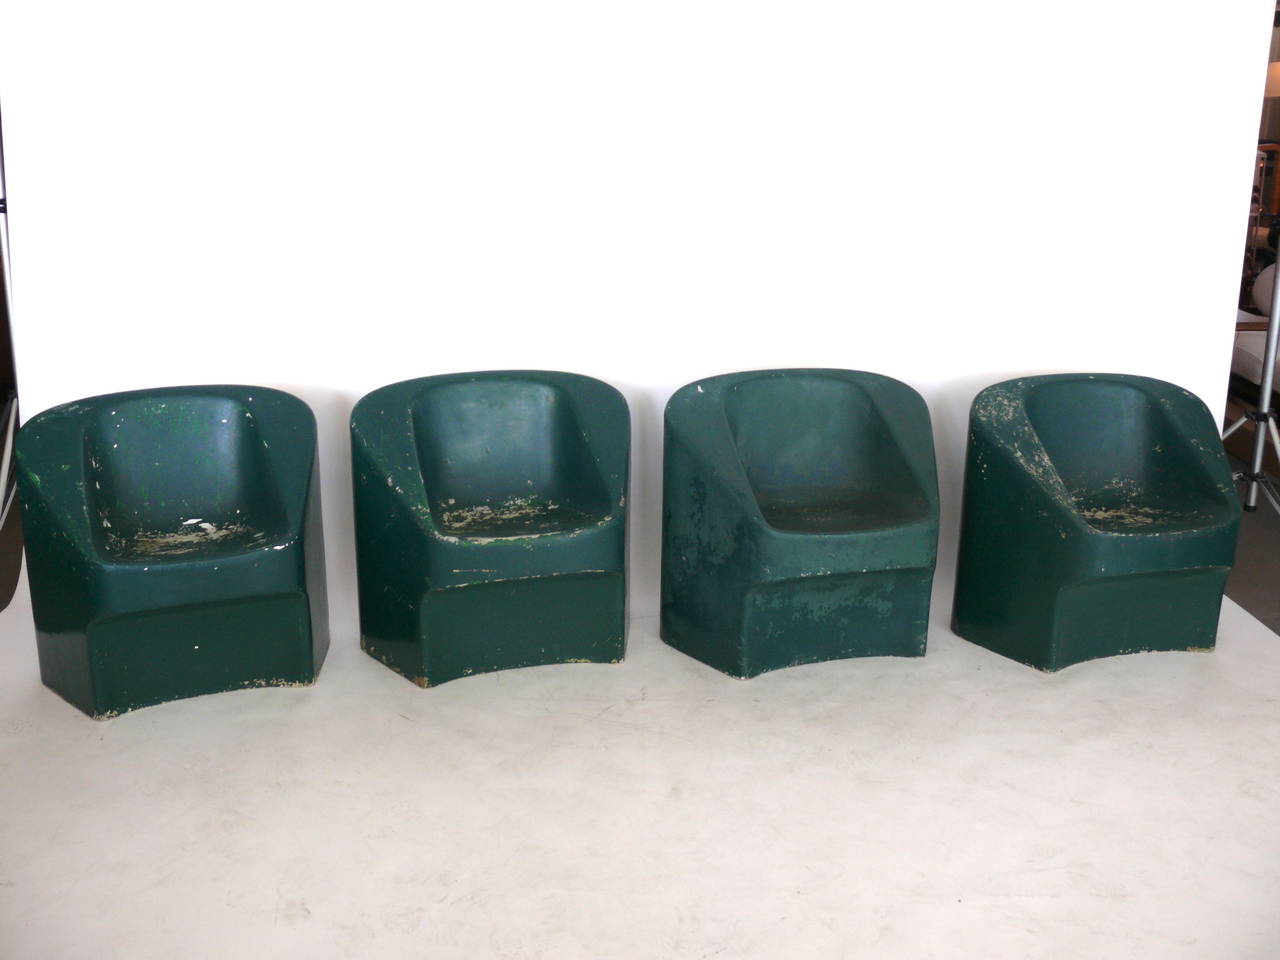 Fantastic set of four cement chairs by Swiss architect Willy Guhl. Chairs would look great inside or out. Each chair in its own state of vintage condition. Very comfortable. 4 chairs available. Priced as a pair.